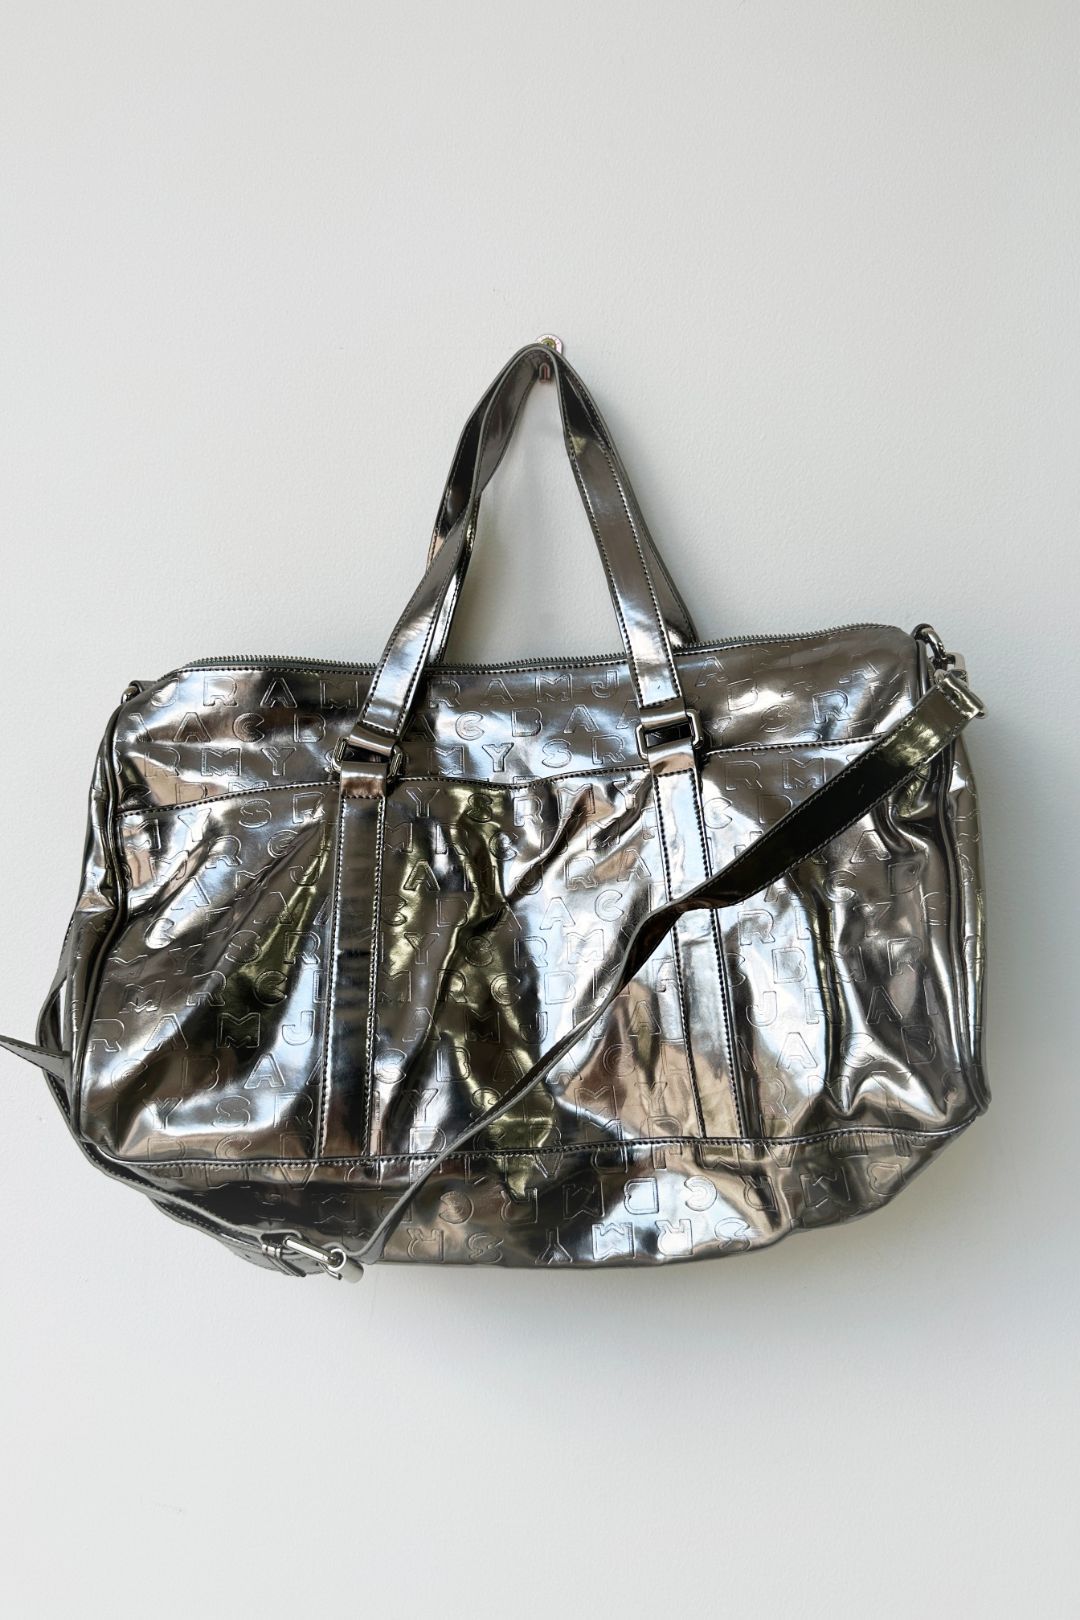 Marc by Marc Jacobs Metallic Silver Duffle Bag